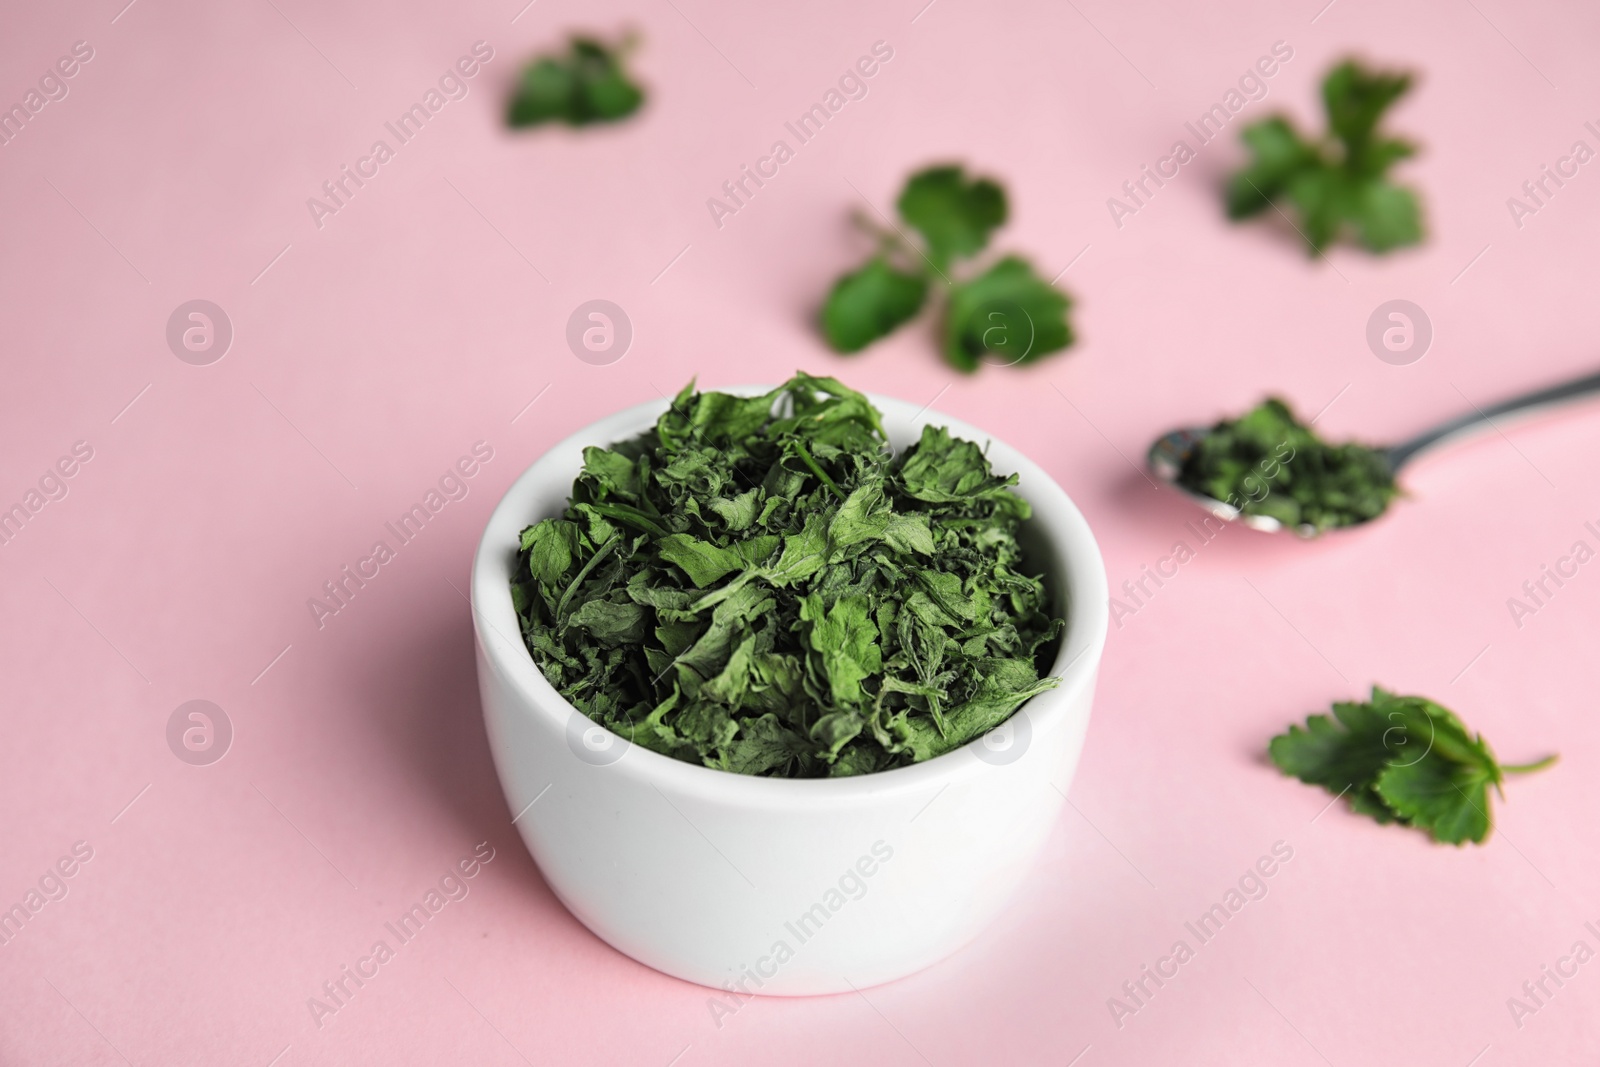 Photo of Bowl with dried parsley on pink background